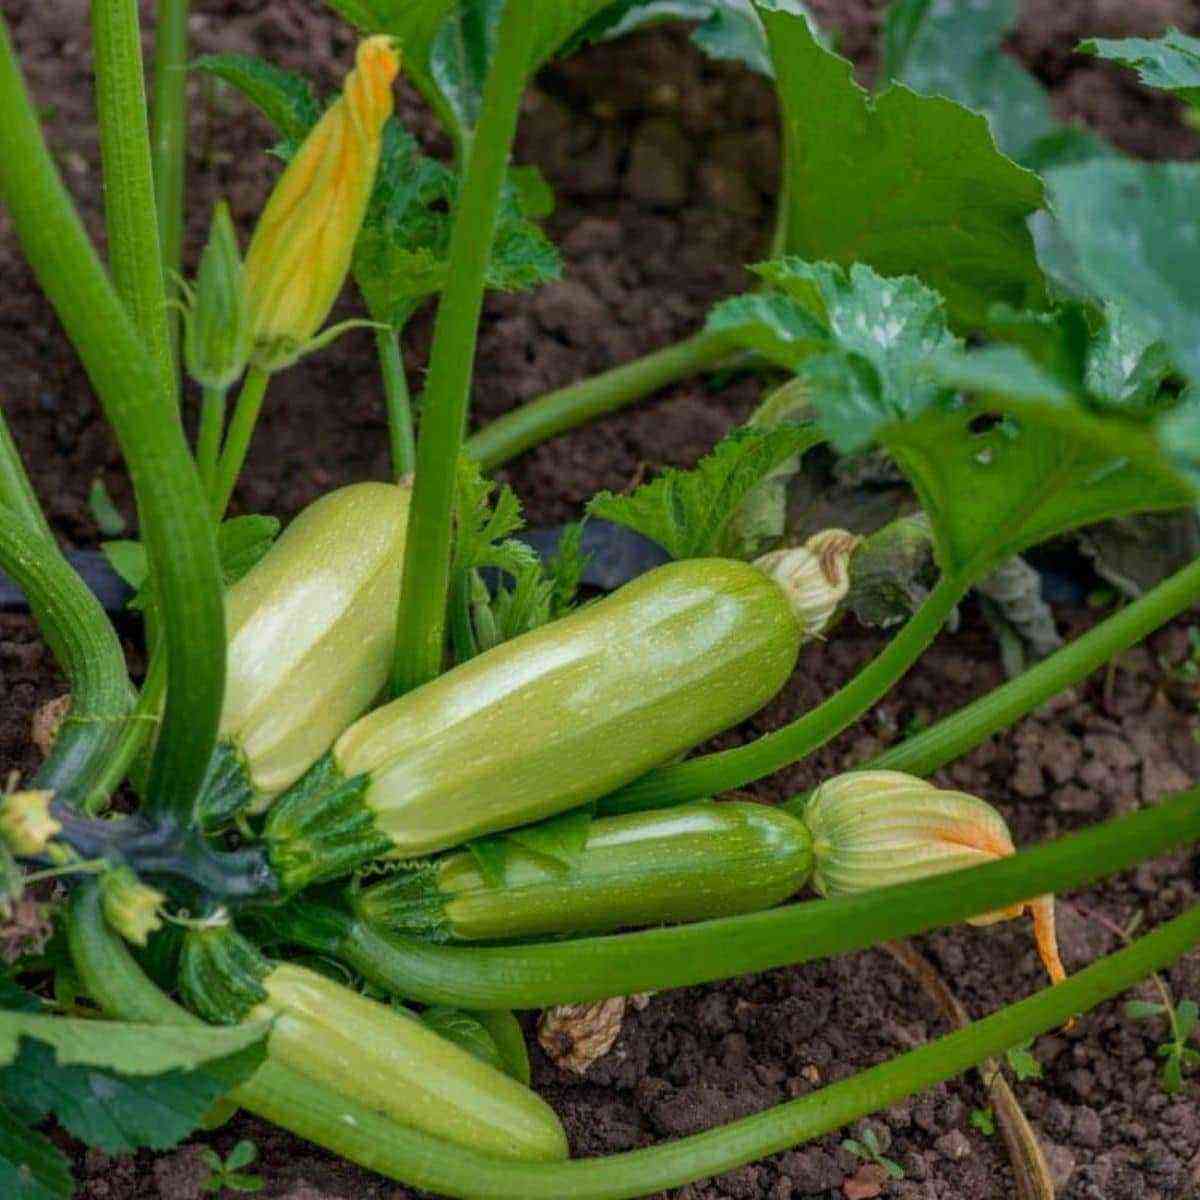 Causes of rotting zucchini and ways to save the crop